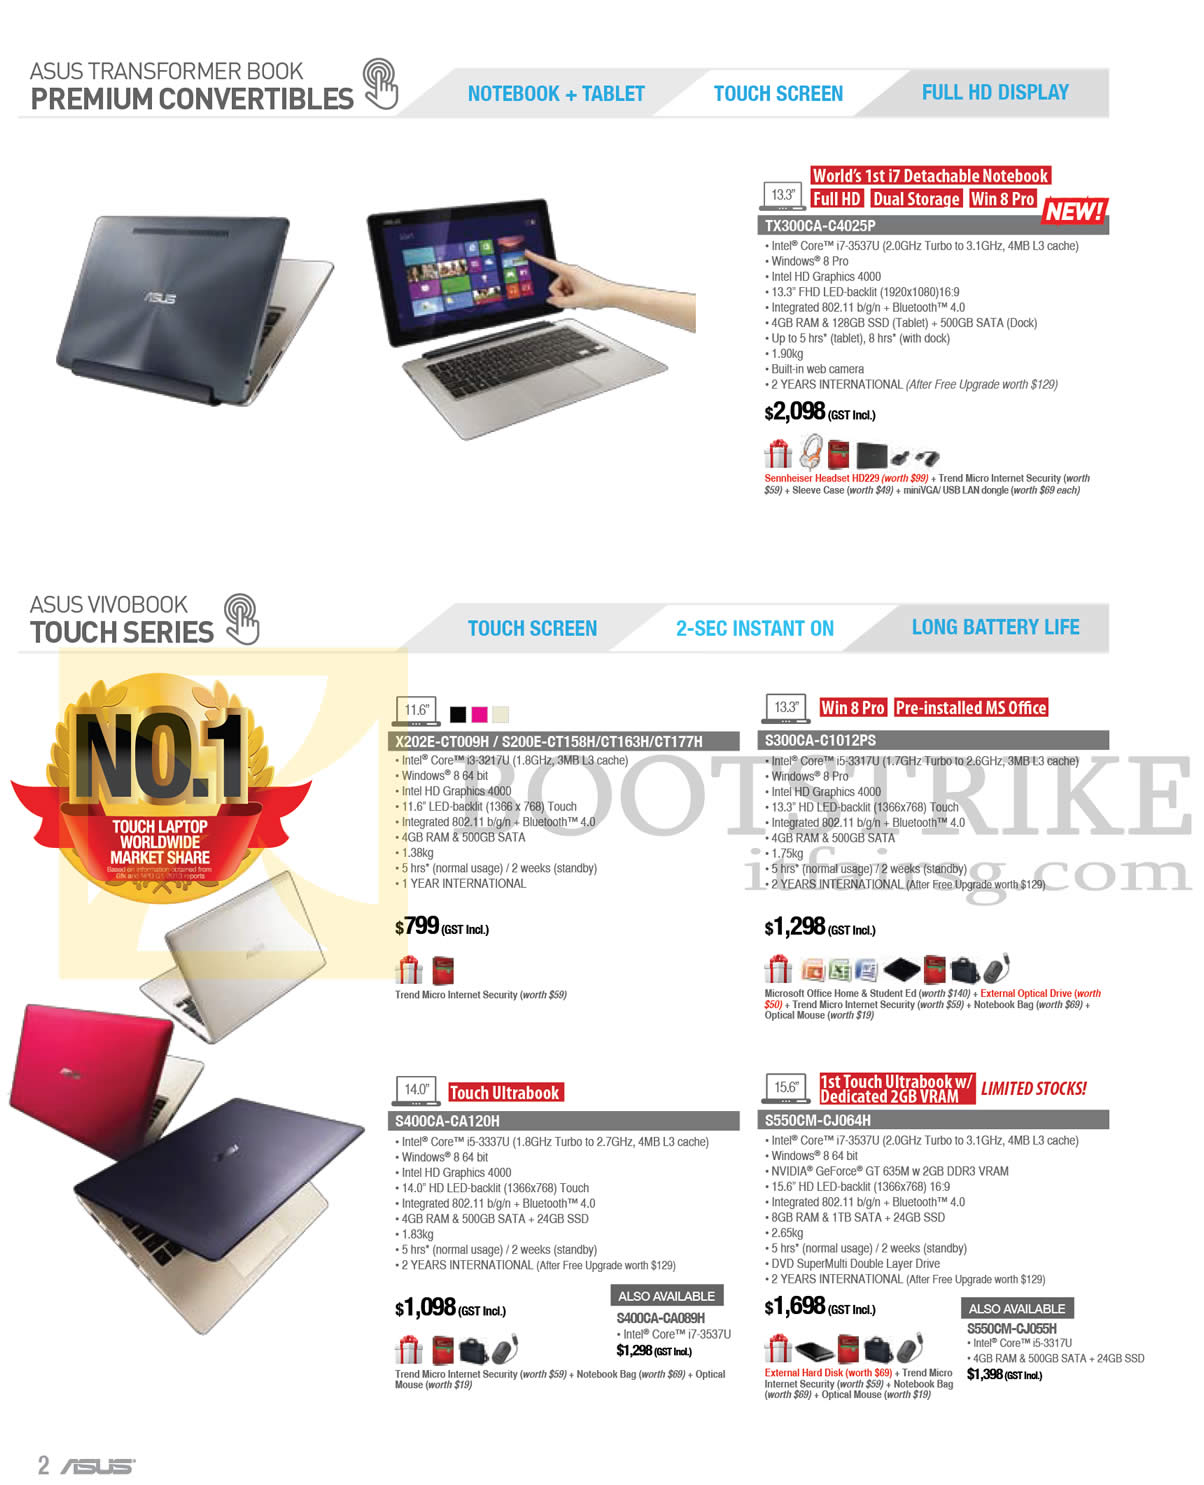 PC SHOW 2013 price list image brochure of ASUS Notebooks Transformer Book TX300CA-C4025P, X202E-CT009H, S200E-CT158H CT163H CT177H, S300CA-C1012PS, S400CA-CA120H, S550CM-CJ064H